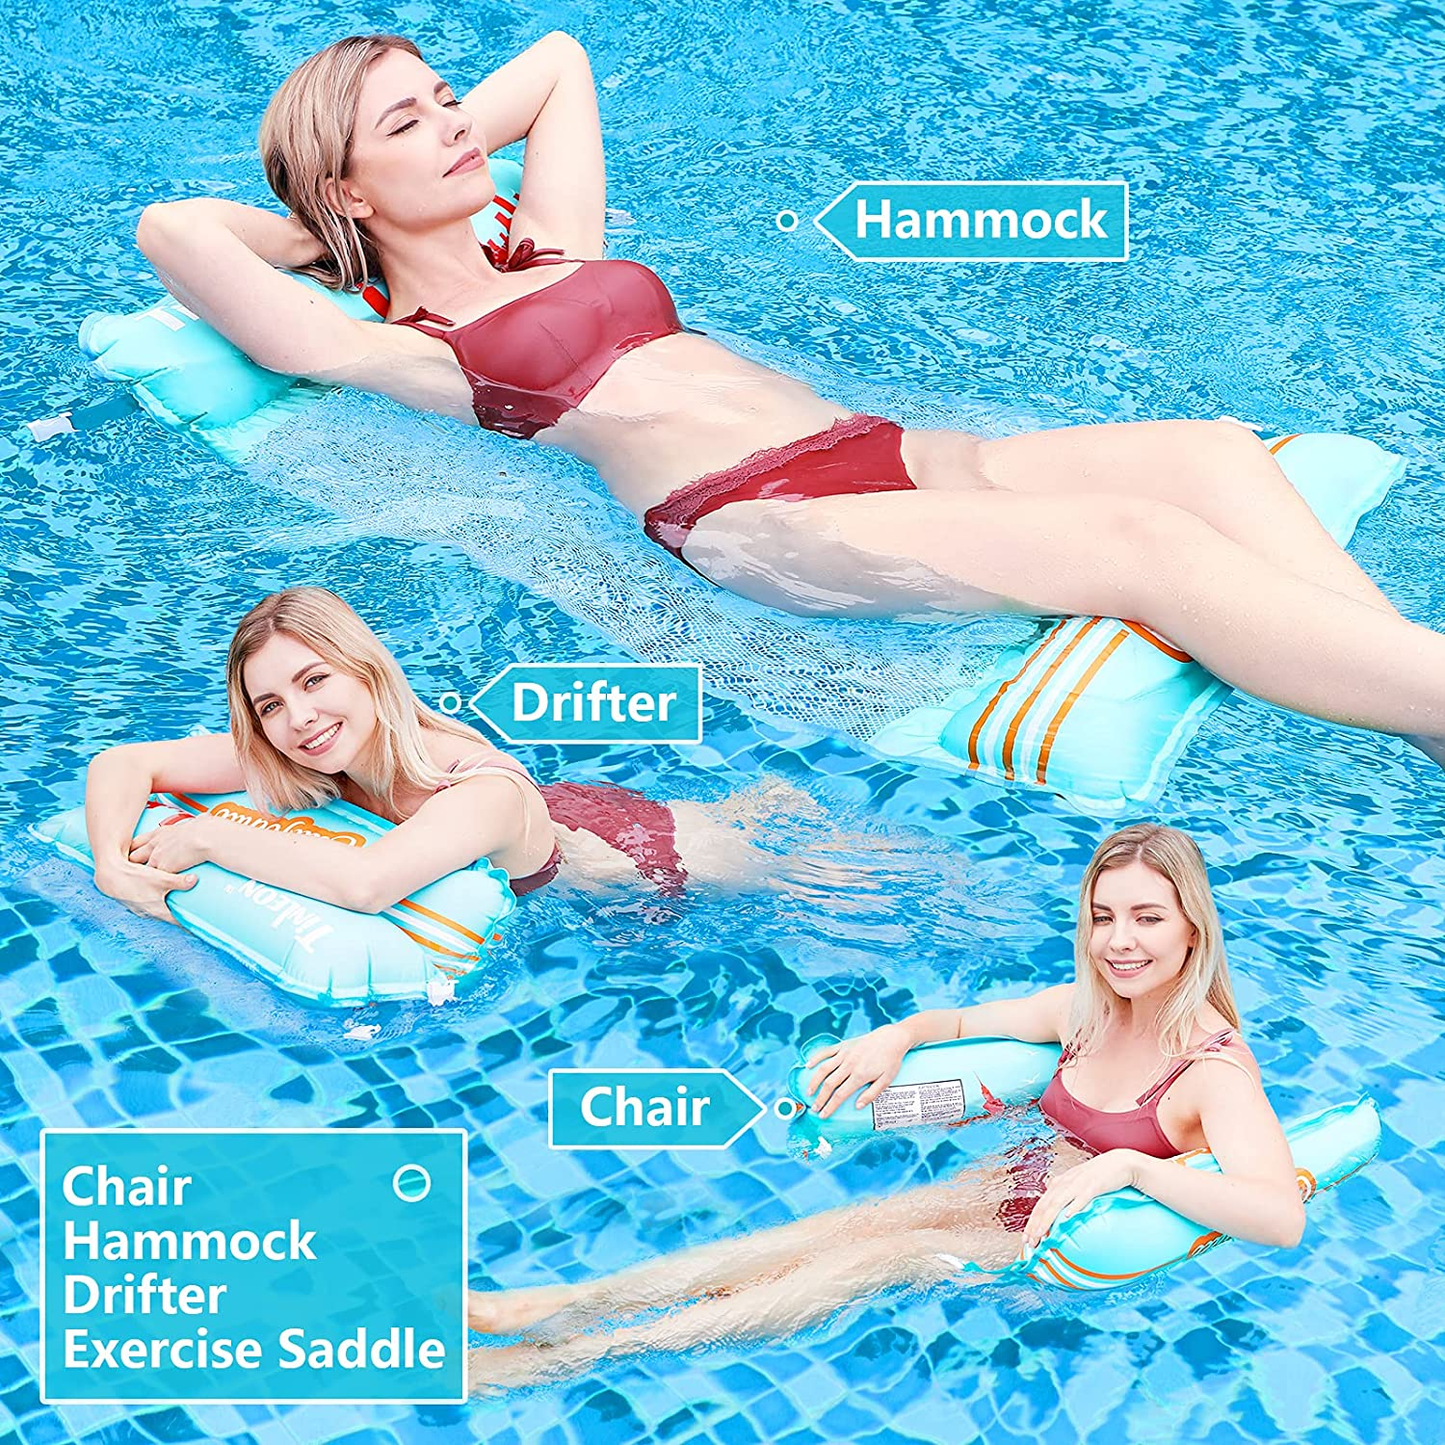 Water Hammock Pool Float: 2-Pack Swimming Inflatable Pool Float, California & Los Angeles Theme for Adult (Saddle, Lounge Chair, Hammock, Drifter) Portable Water Hammock Lounge Pool Chair